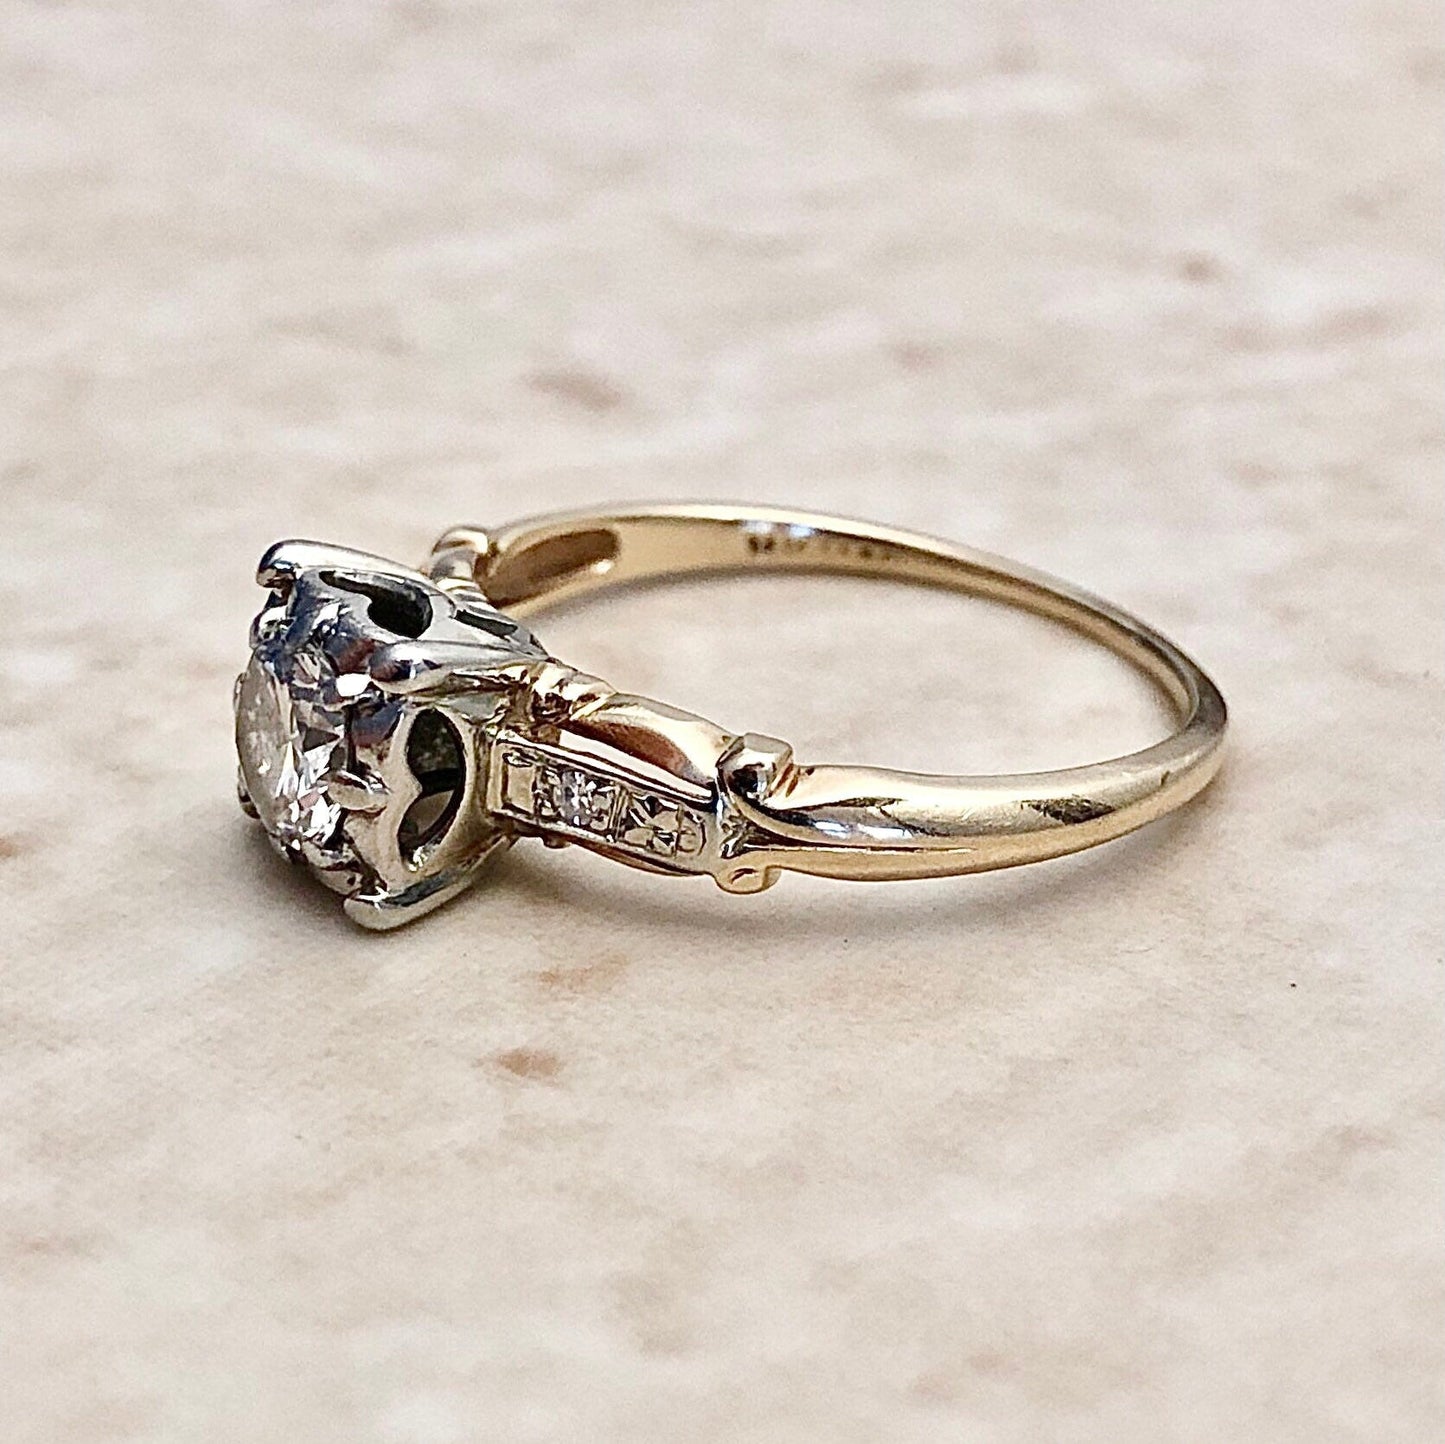 Vintage Retro Diamond Engagement Ring 0.57 CT - Circa 1940 -  14K Two Tone Gold - Vintage Solitaire - Wedding Ring - Bridal Jewelry